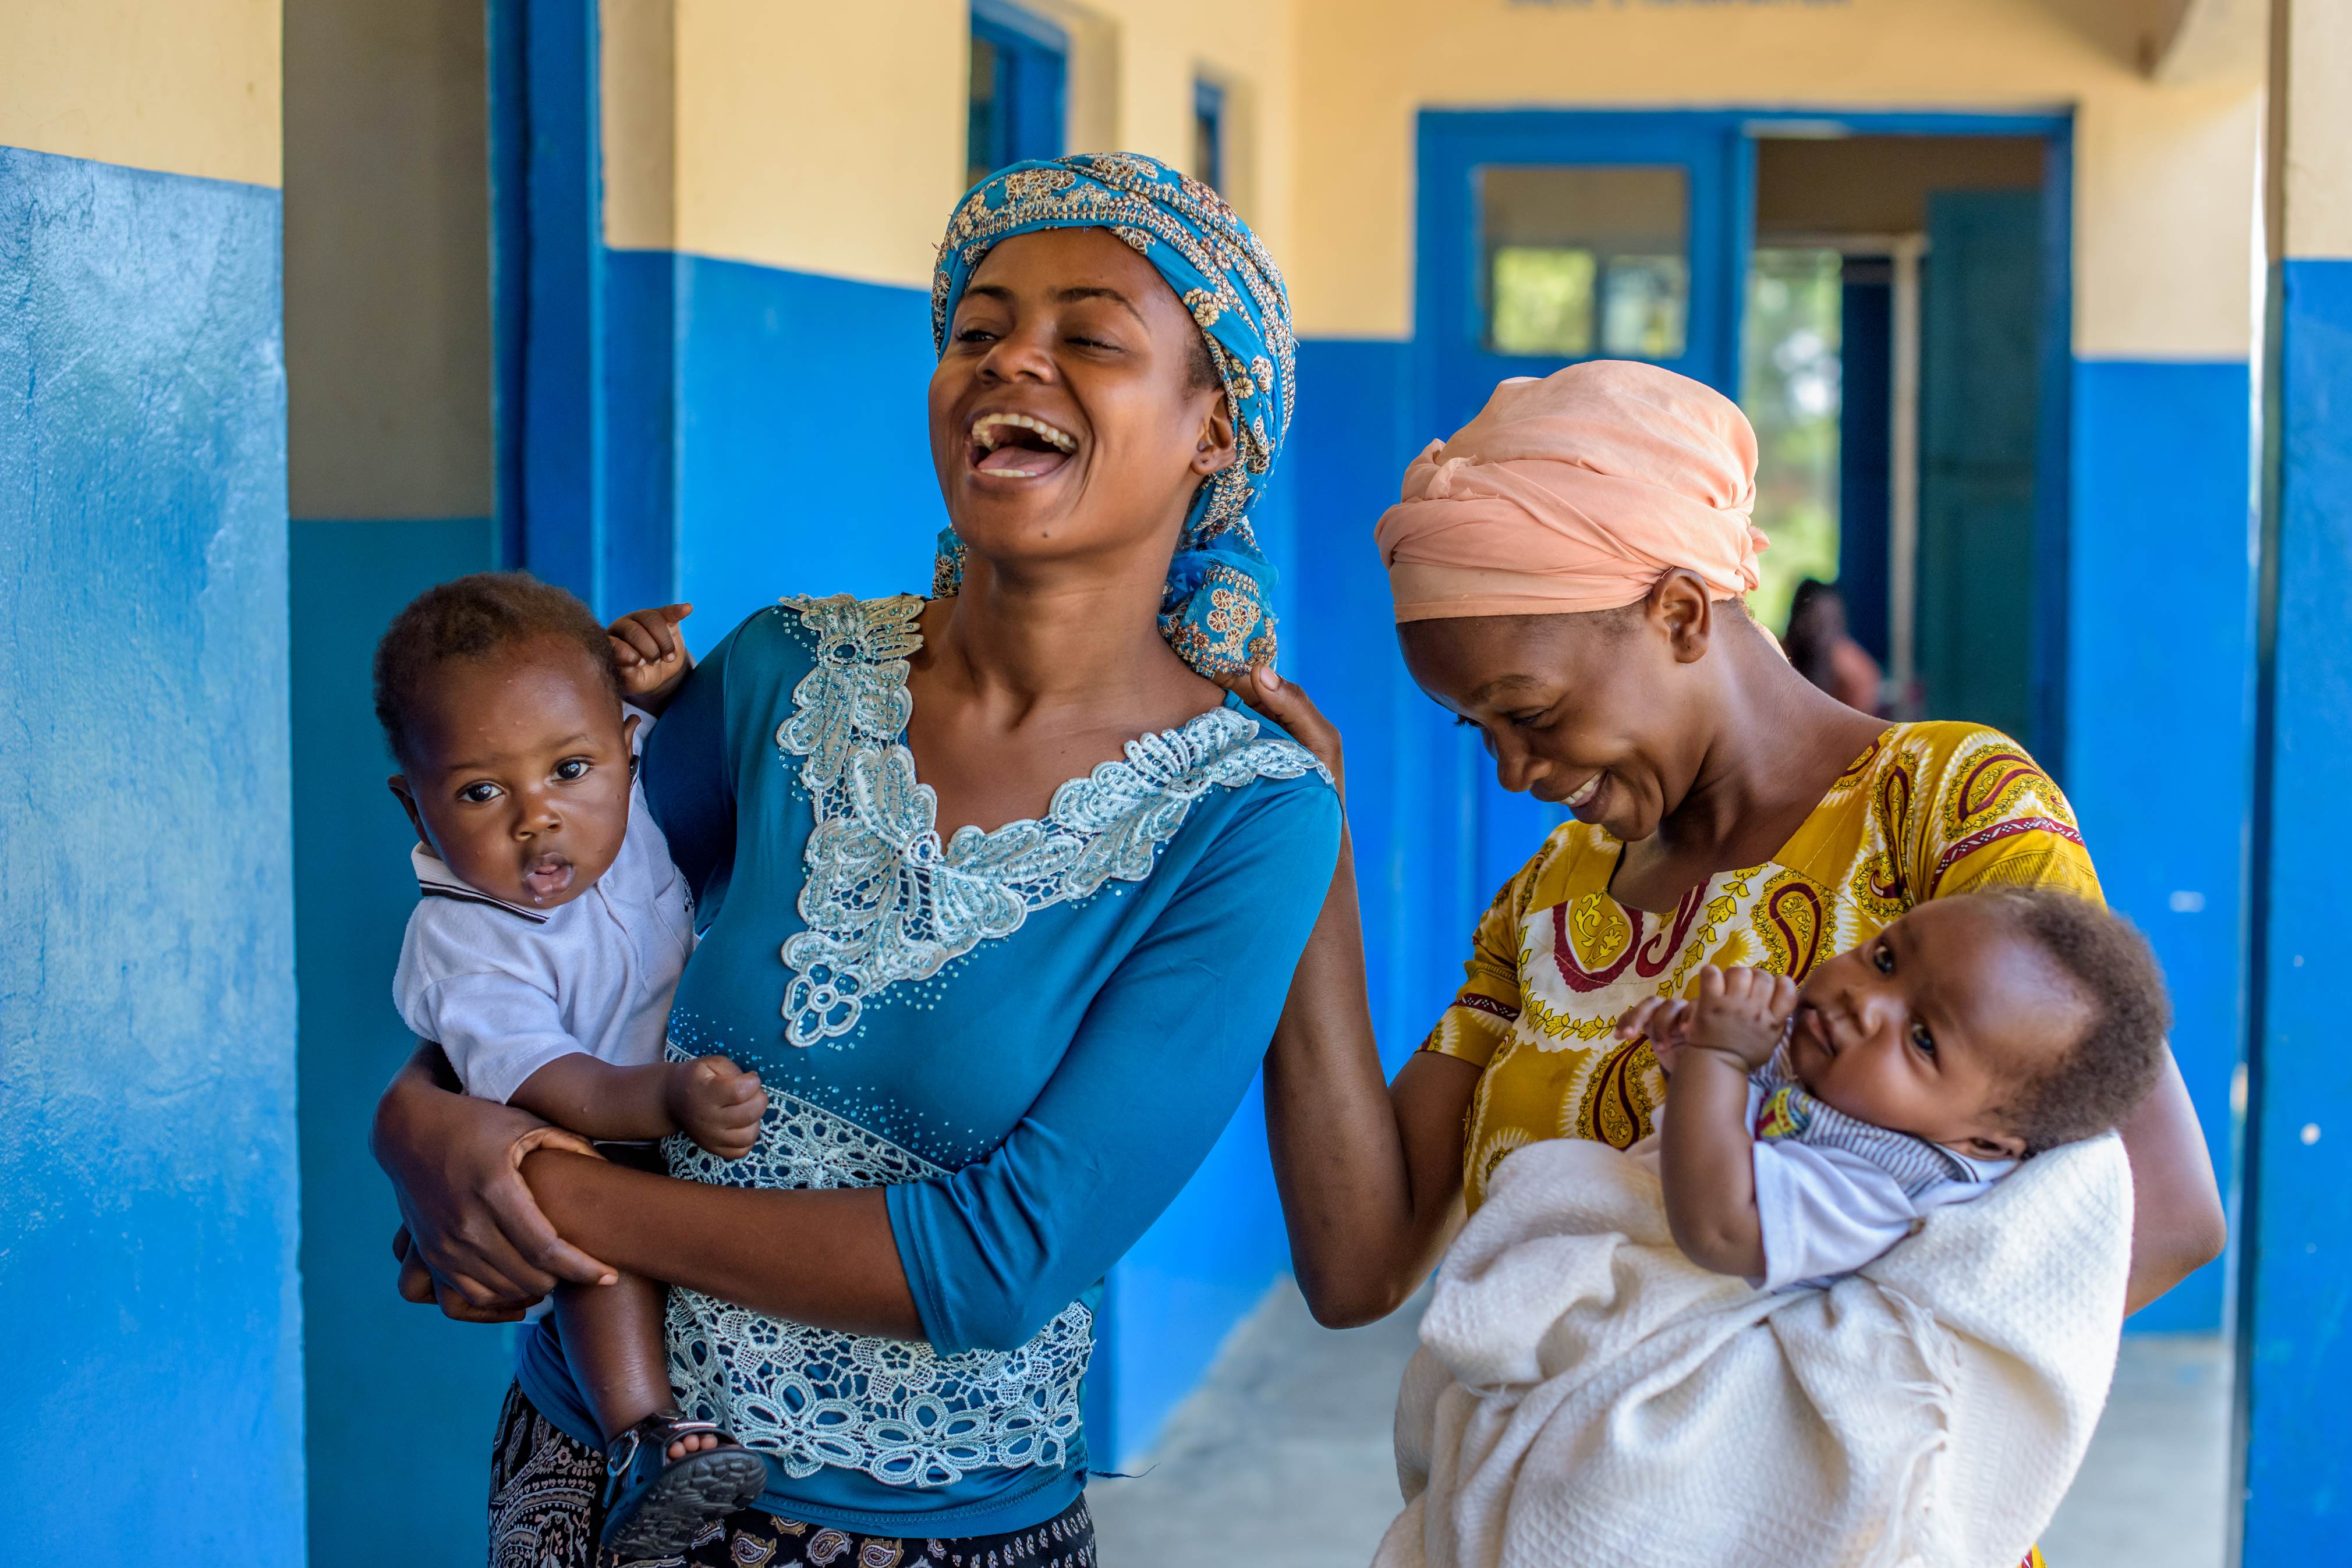 Two women in DRC walk along a blue-painted corridor, carrying a baby each and smiling